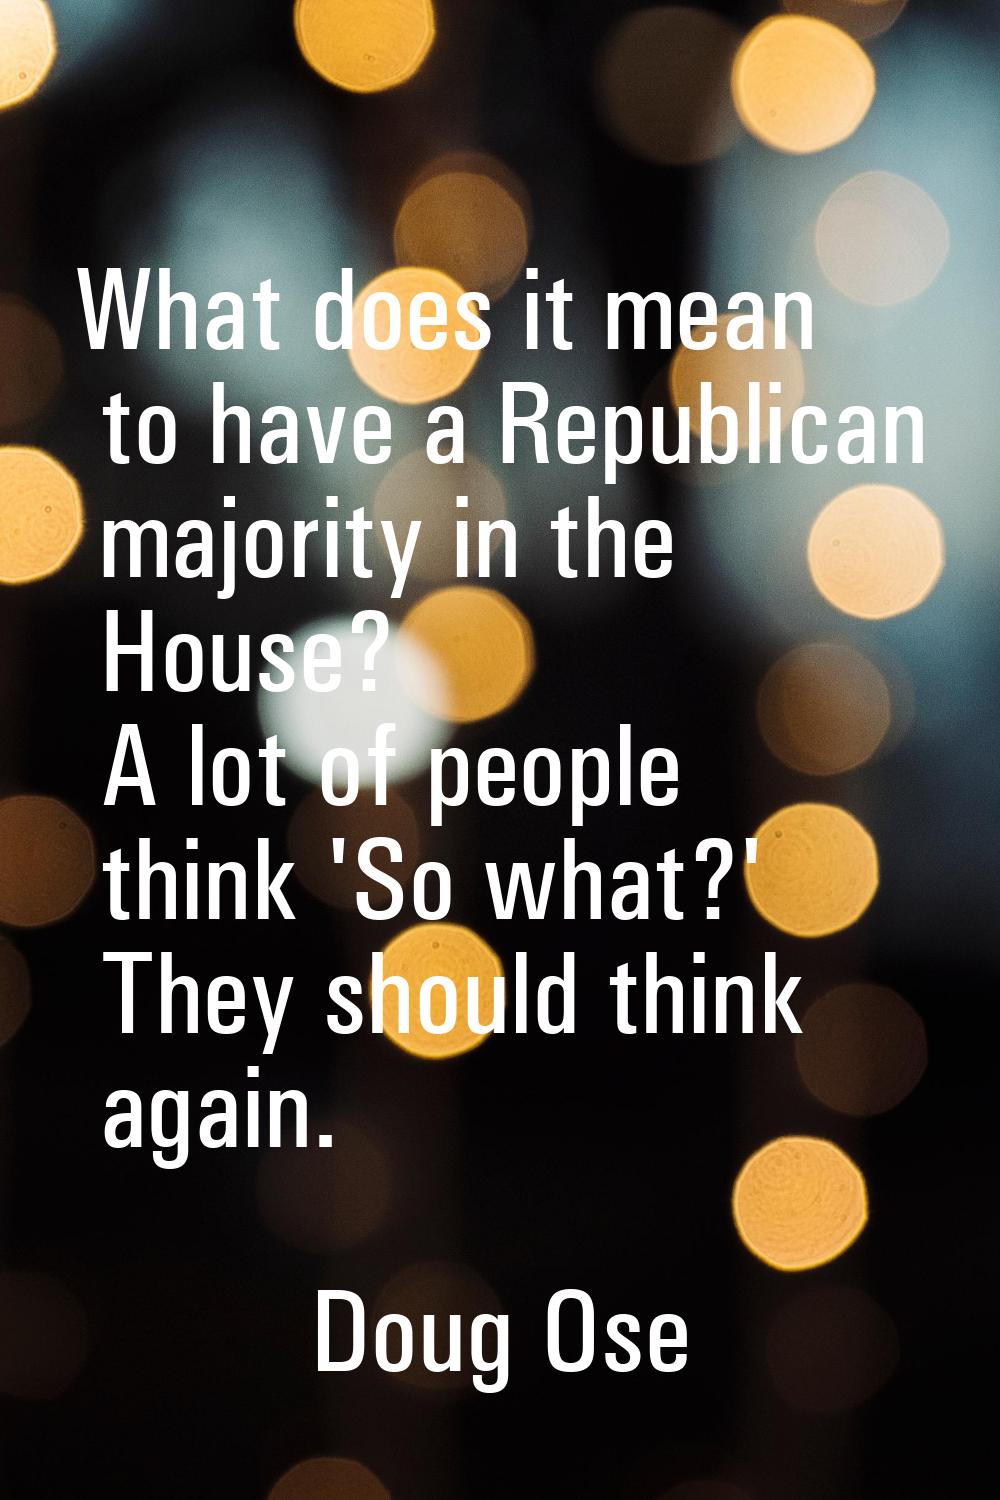 What does it mean to have a Republican majority in the House? A lot of people think 'So what?' They